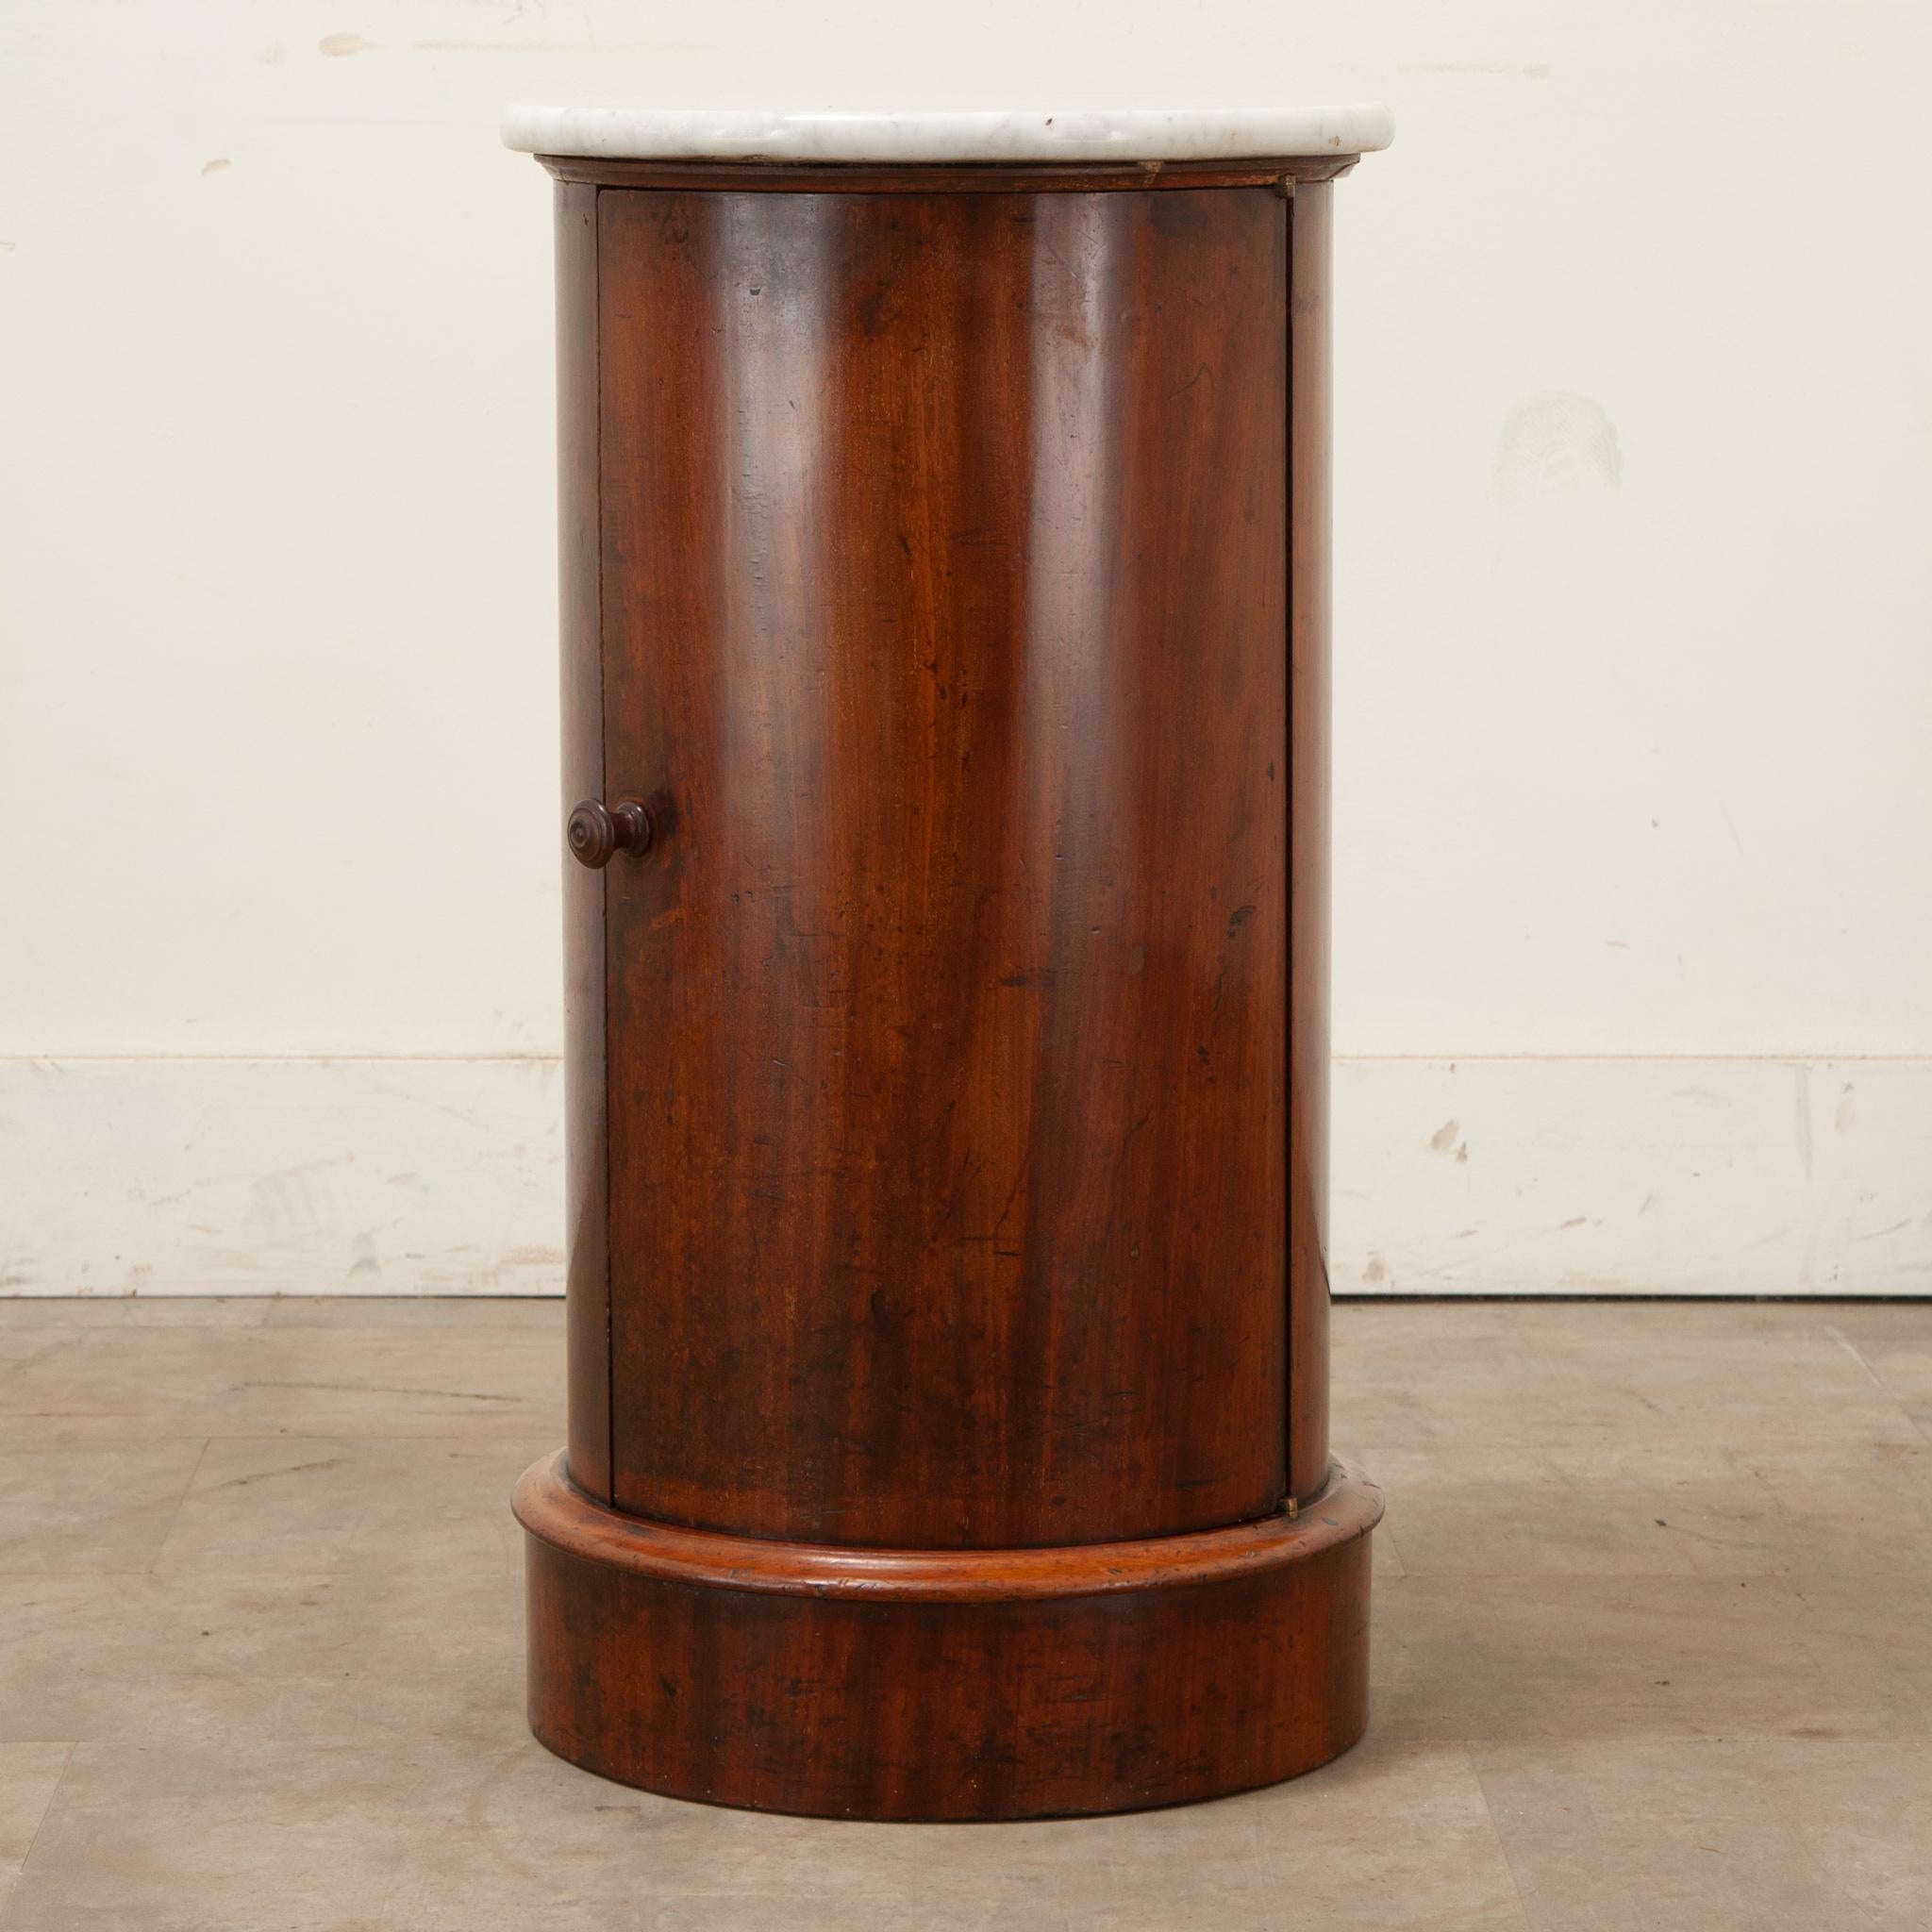 A round mahogany and marble English bedside table. This table has a white beveled marble top over a mahogany body with a door that has a turned knob and opens to reveal a single circular fixed shelf at 10 ¾” deep. The whole sits on a round plinth